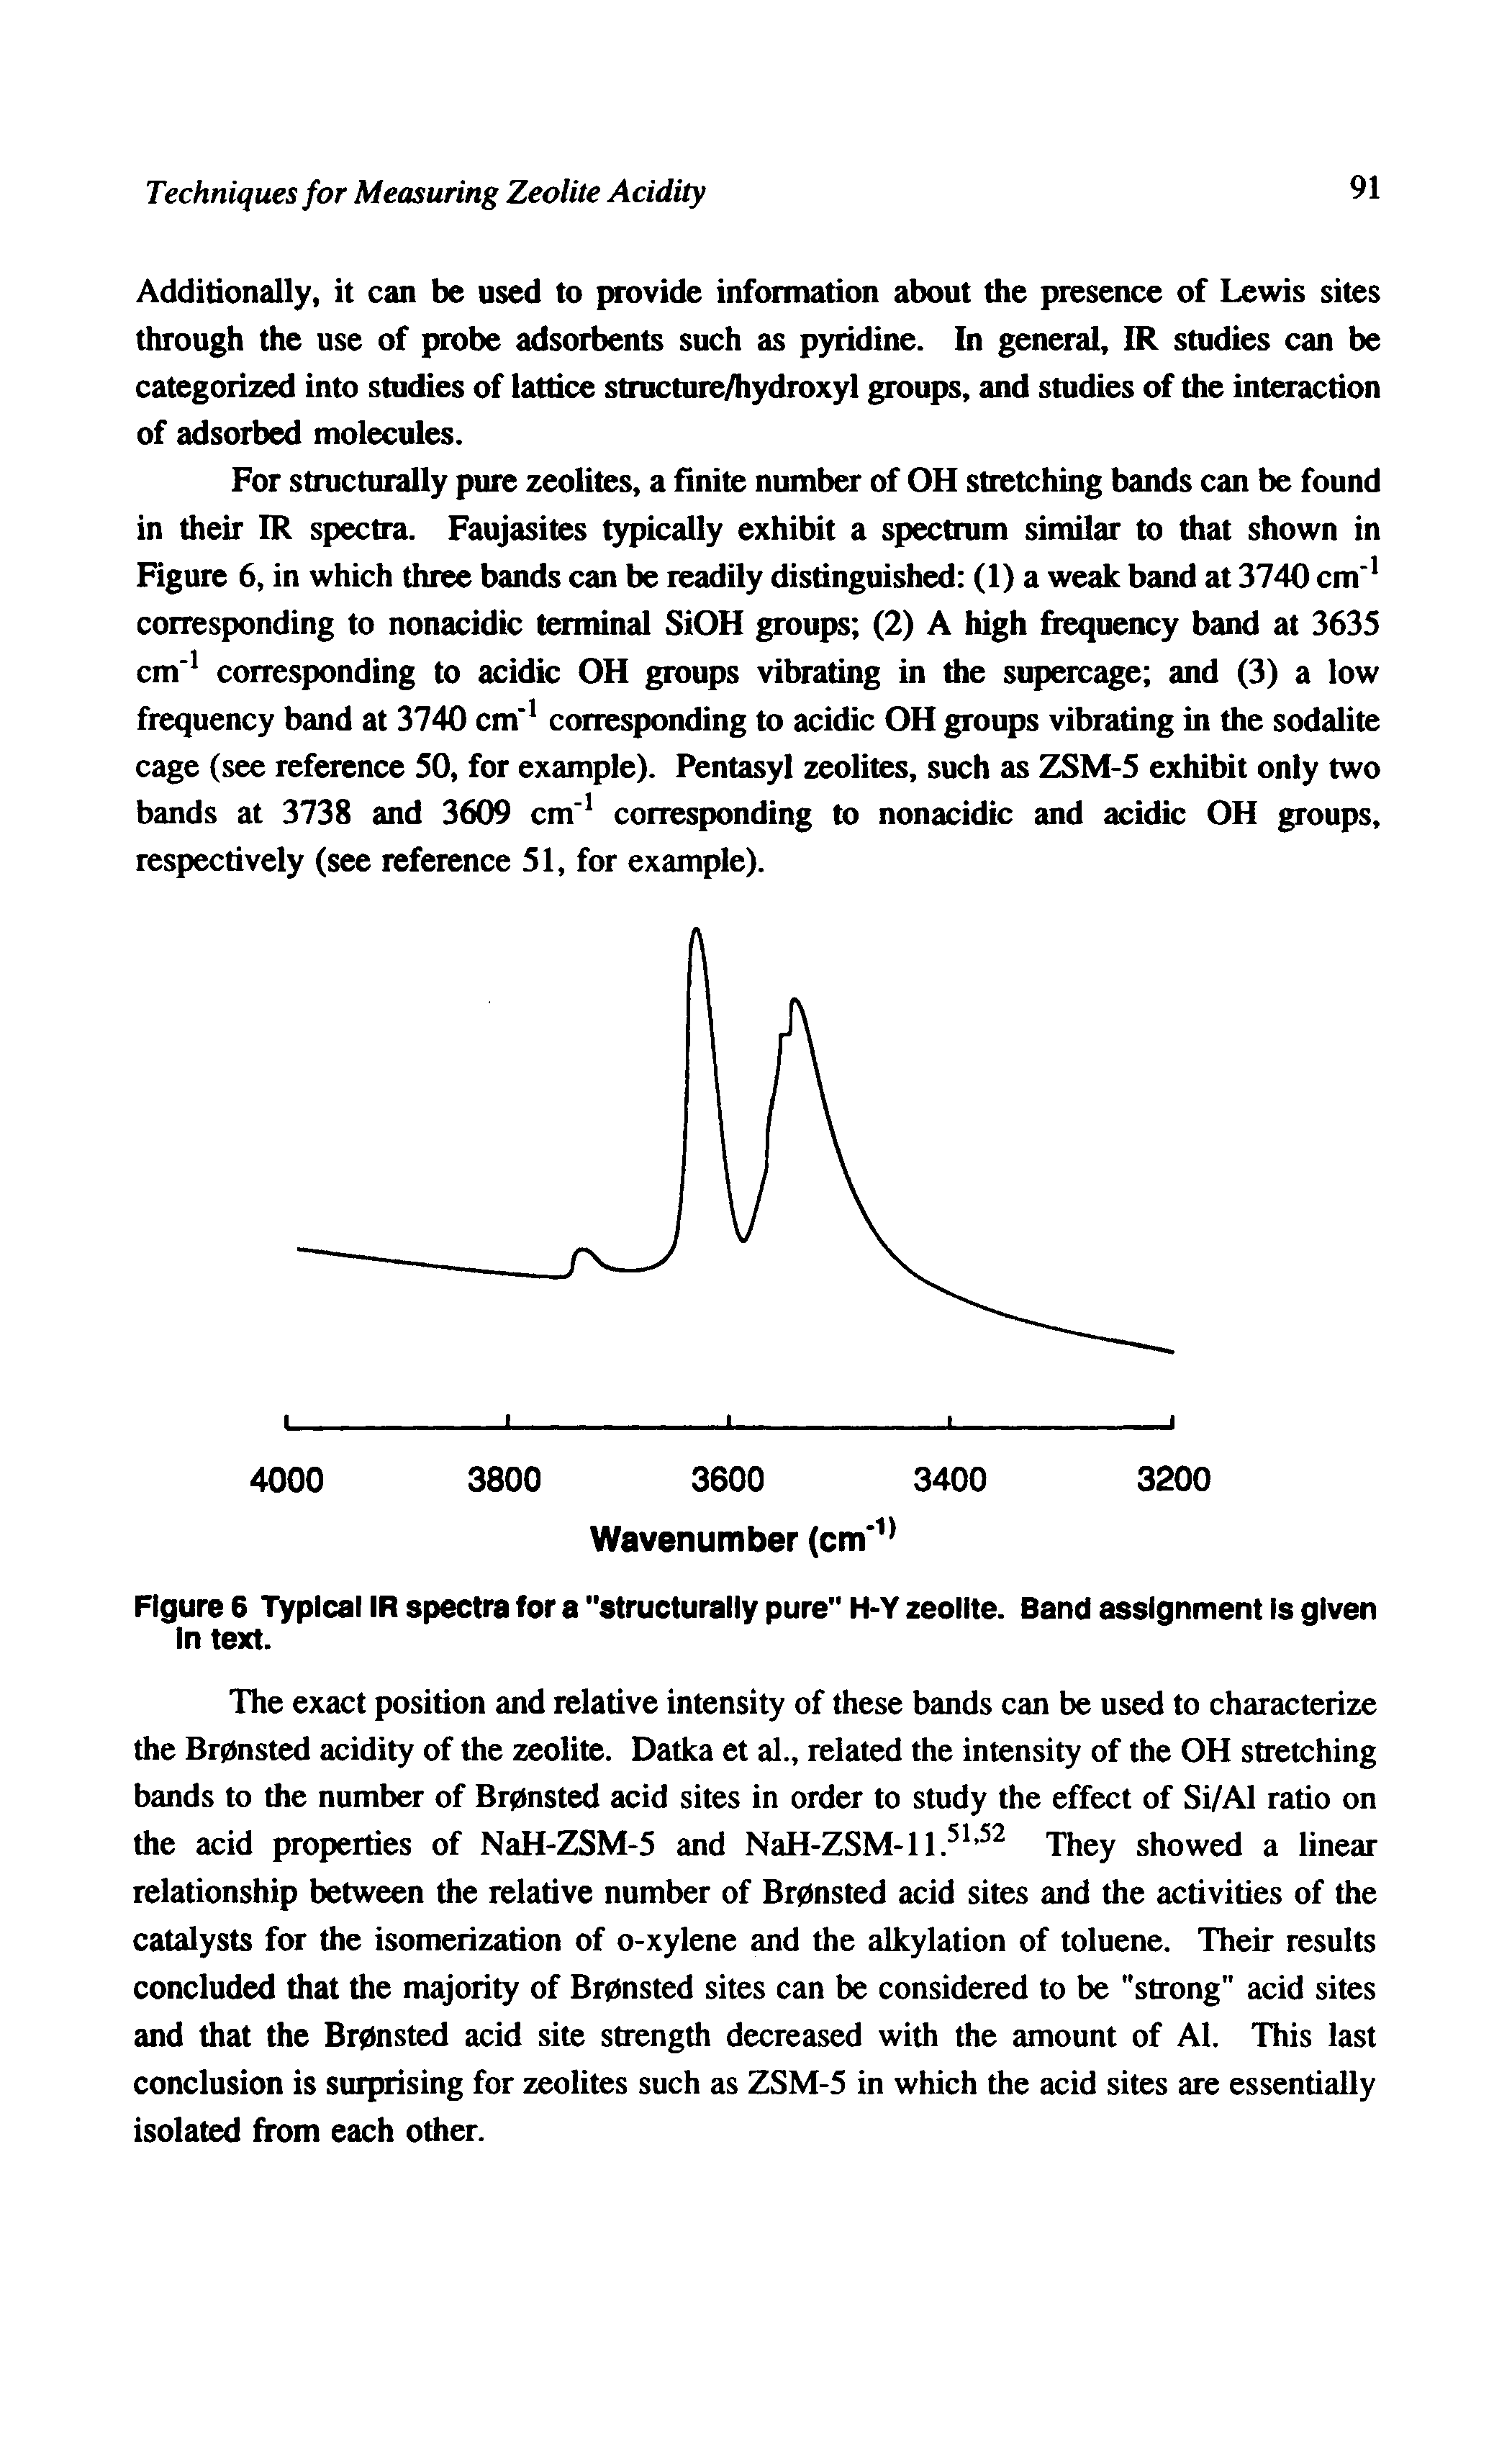 Figure 6 Typical IR spectra for a "structurally pure" H-Y zeolite. Band assignment Is given In text.